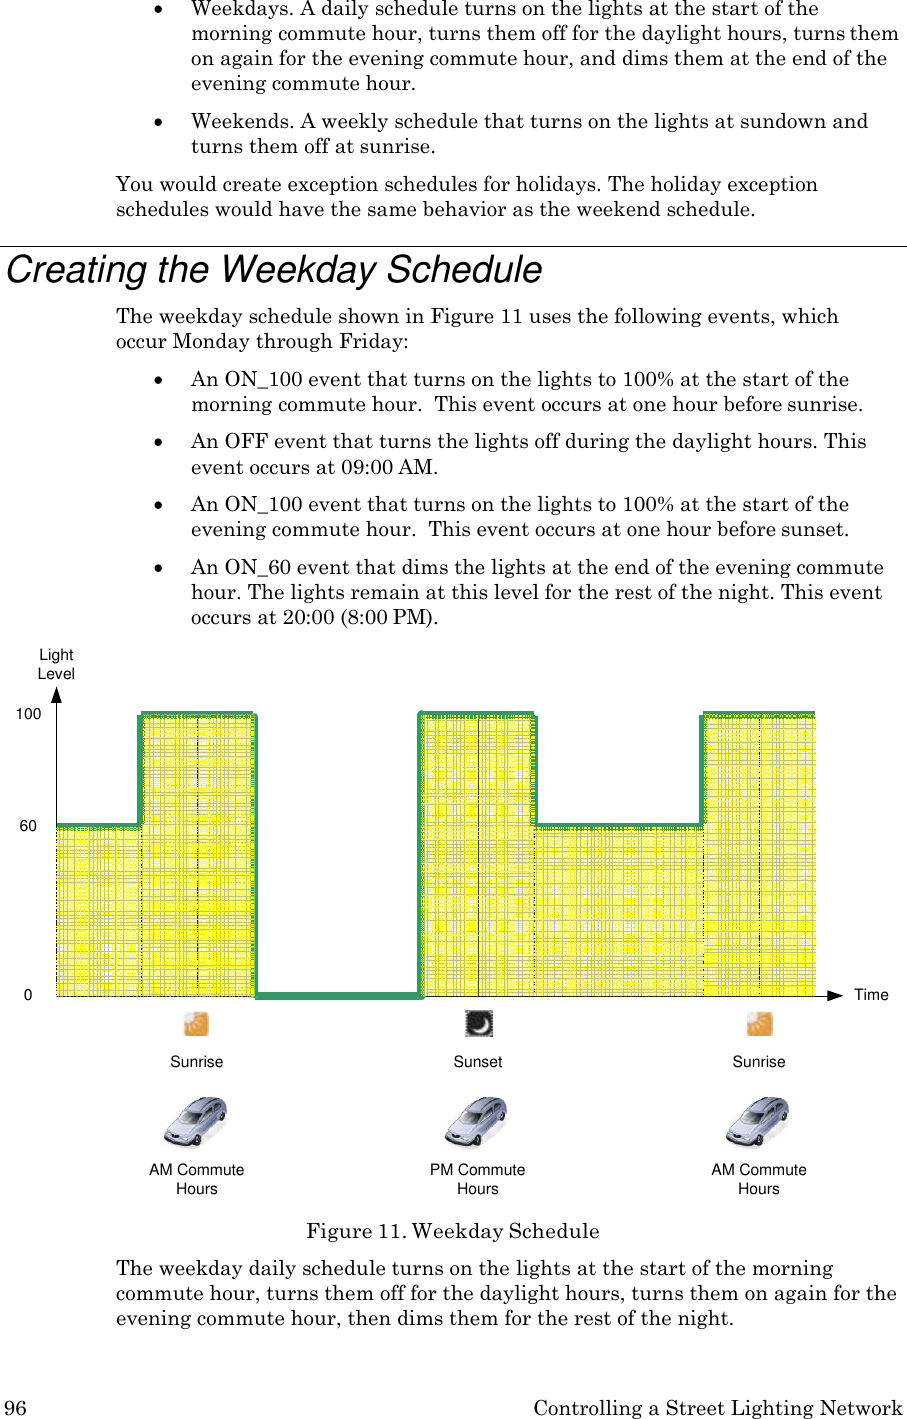 96 Controlling a Street Lighting Network   Weekdays. A daily schedule turns on the lights at the start of the morning commute hour, turns them off for the daylight hours, turns them on again for the evening commute hour, and dims them at the end of the evening commute hour.  Weekends. A weekly schedule that turns on the lights at sundown and turns them off at sunrise. You would create exception schedules for holidays. The holiday exception schedules would have the same behavior as the weekend schedule.  Creating the Weekday Schedule The weekday schedule shown in Figure 11 uses the following events, which occur Monday through Friday:  An ON_100 event that turns on the lights to 100% at the start of the morning commute hour.  This event occurs at one hour before sunrise.  An OFF event that turns the lights off during the daylight hours. This event occurs at 09:00 AM.  An ON_100 event that turns on the lights to 100% at the start of the evening commute hour.  This event occurs at one hour before sunset.  An ON_60 event that dims the lights at the end of the evening commute hour. The lights remain at this level for the rest of the night. This event occurs at 20:00 (8:00 PM).  Light Level  100     60       0  Time  Sunrise  AM Commute Hours Sunset  PM Commute Hours  Figure 11. Weekday Schedule Sunrise  AM Commute Hours The weekday daily schedule turns on the lights at the start of the morning commute hour, turns them off for the daylight hours, turns them on again for the evening commute hour, then dims them for the rest of the night. 